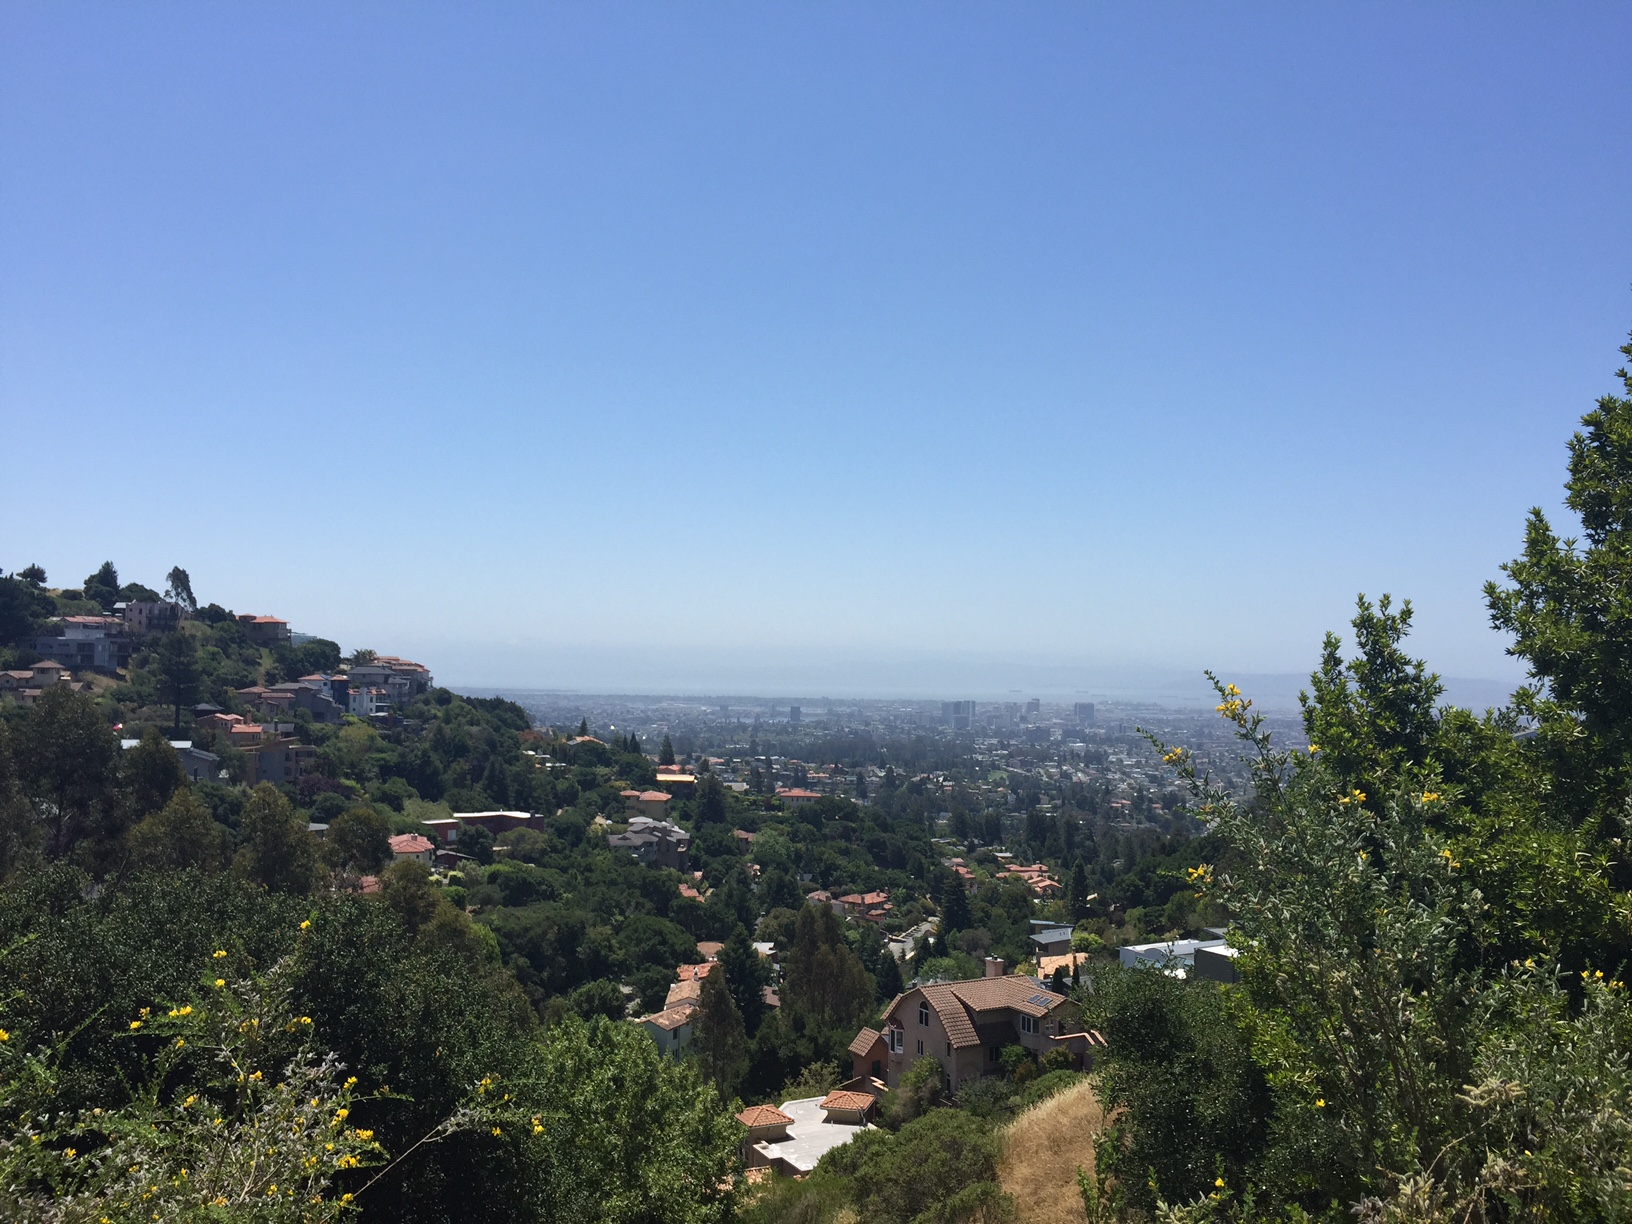 The view from the 2016 Sunset Idea House in the Berkeley Hills neighborhood of Berkeley, CA.